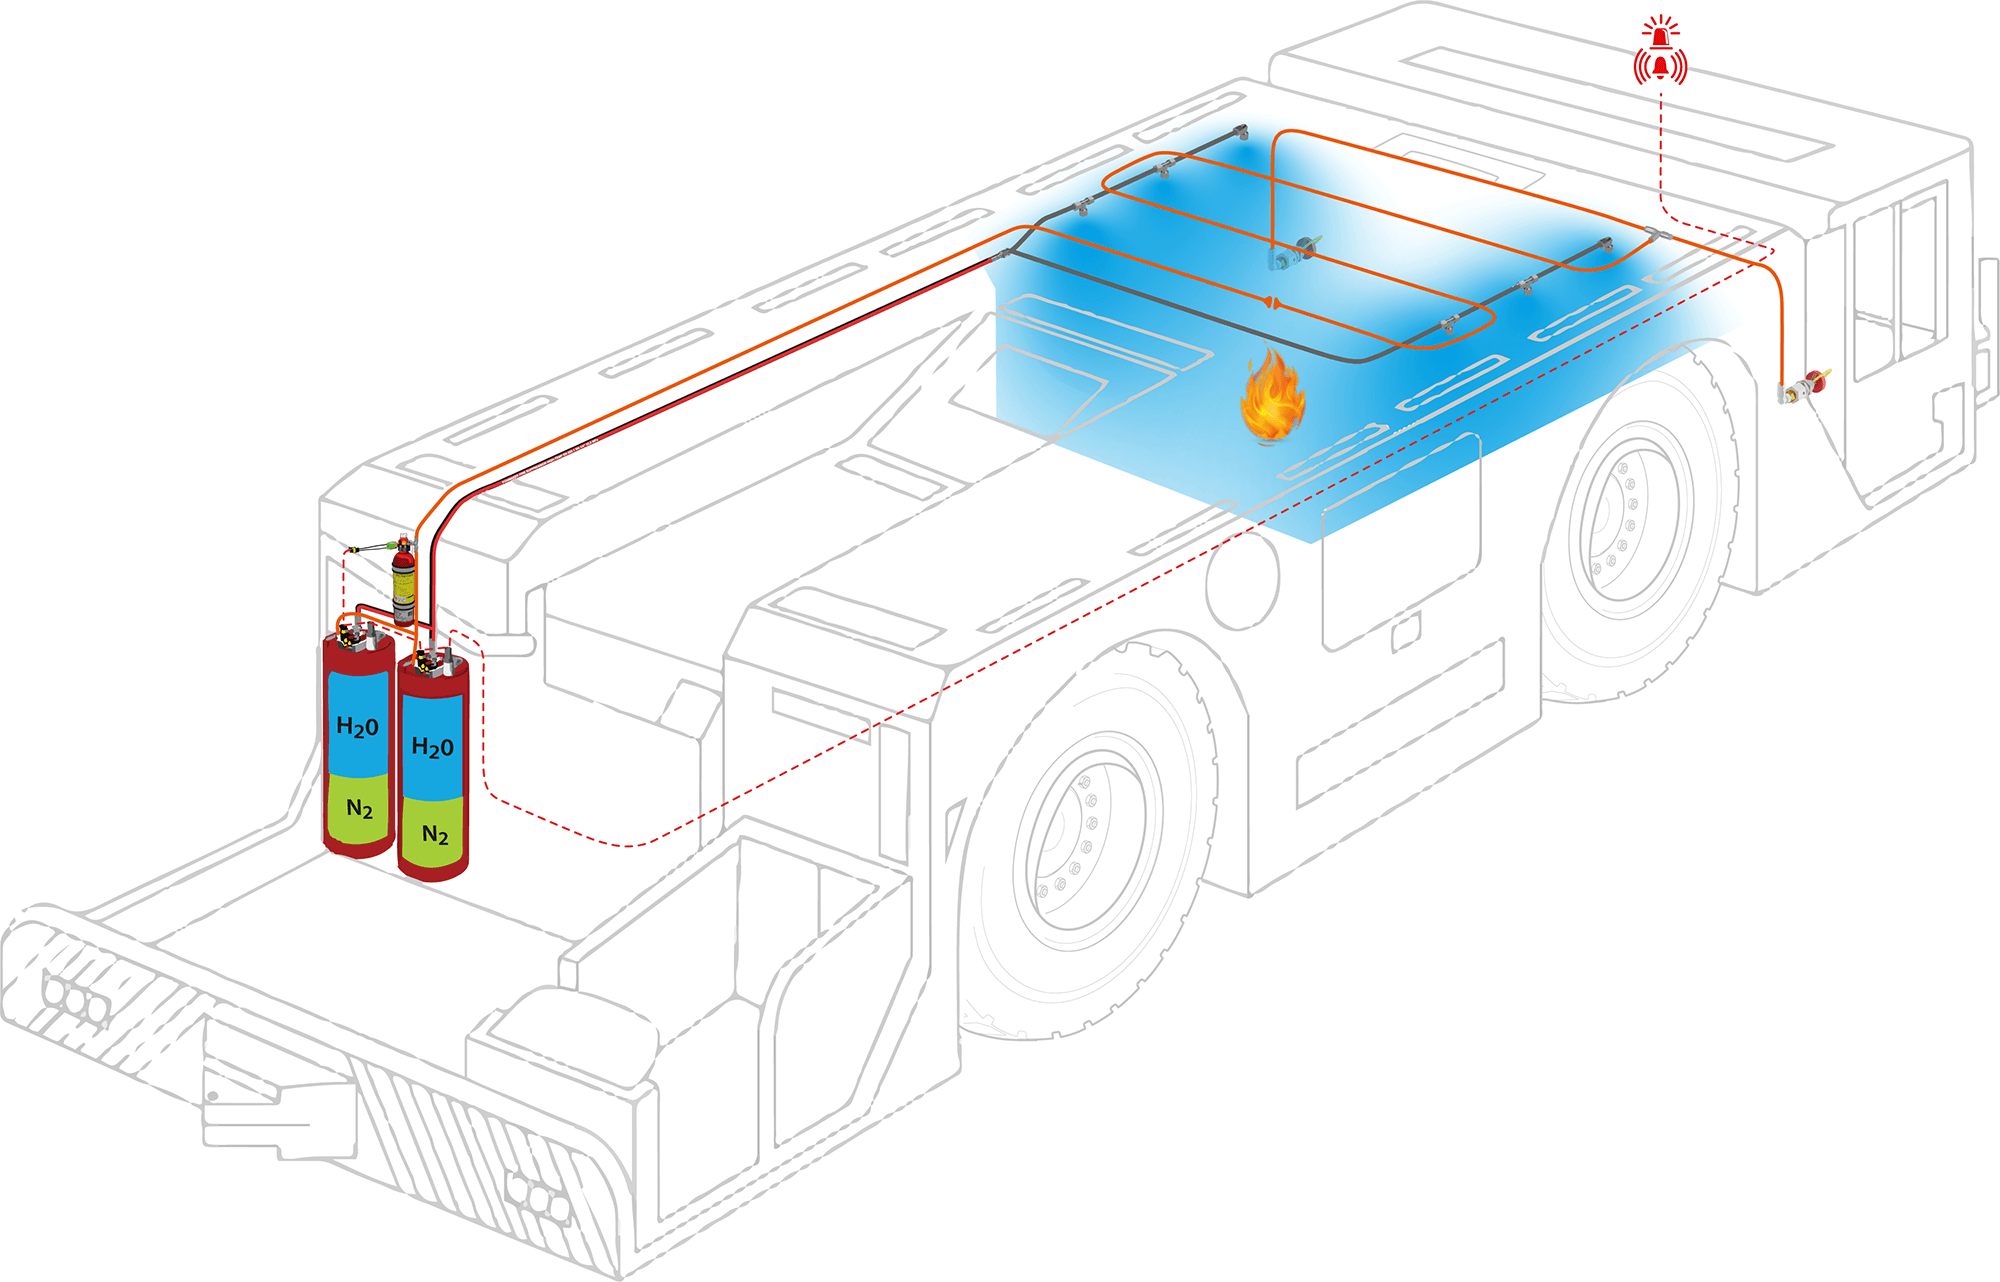 Fire suppression system for GSE